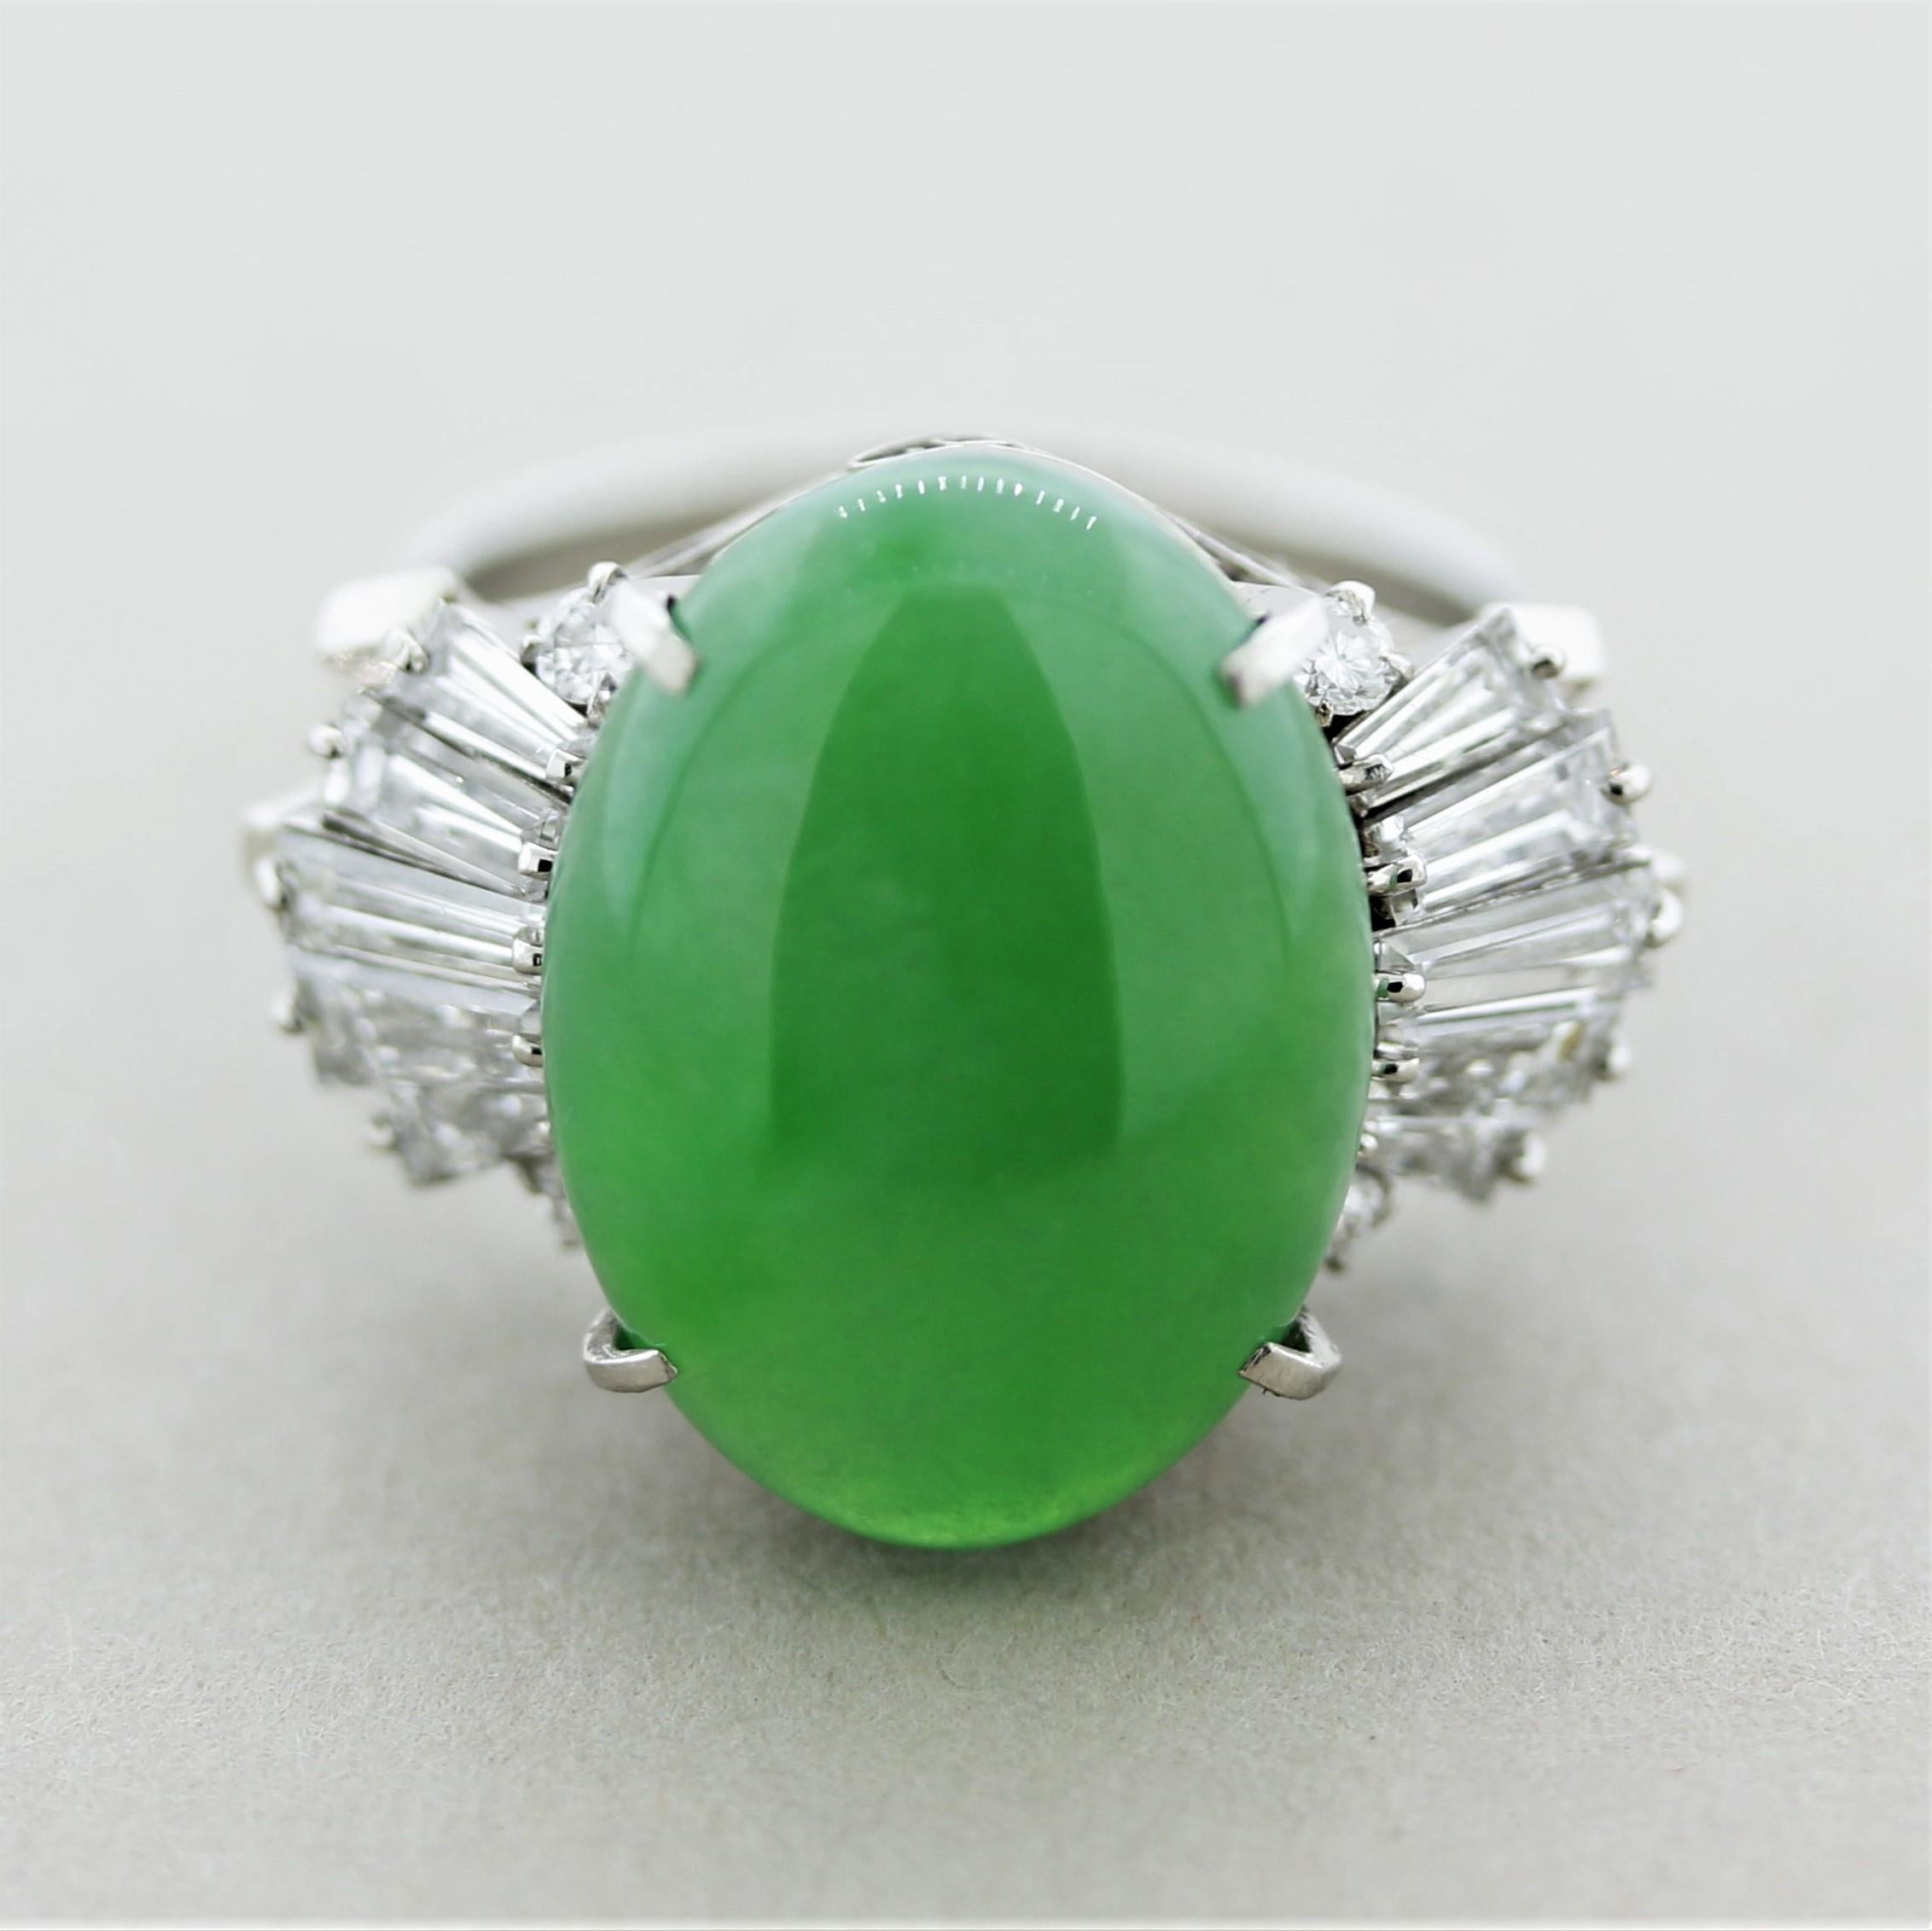 A large jadeite jade takes center stage of this platinum ring. It has an even oval shape with a bright and lively green color. It is accented by 1.28 carats of baguette and round brilliant-cut diamonds set on its sides in a stylish pattern.